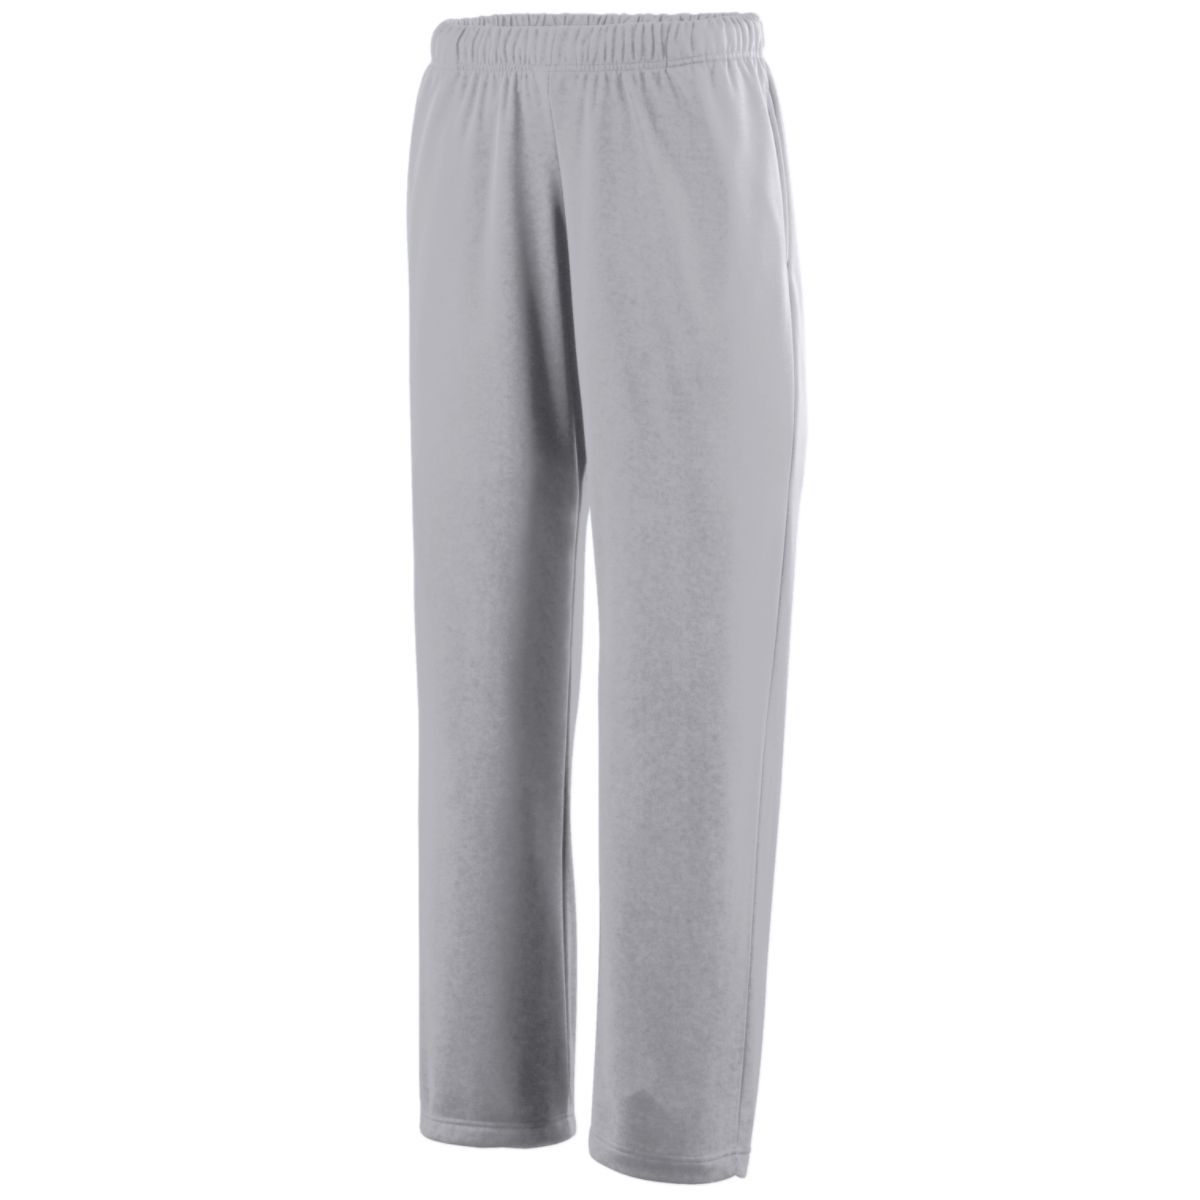 Augusta Sportswear Wicking Fleece Sweatpant in Athletic Grey  -Part of the Adult, Adult-Pants, Pants, Augusta-Products product lines at KanaleyCreations.com